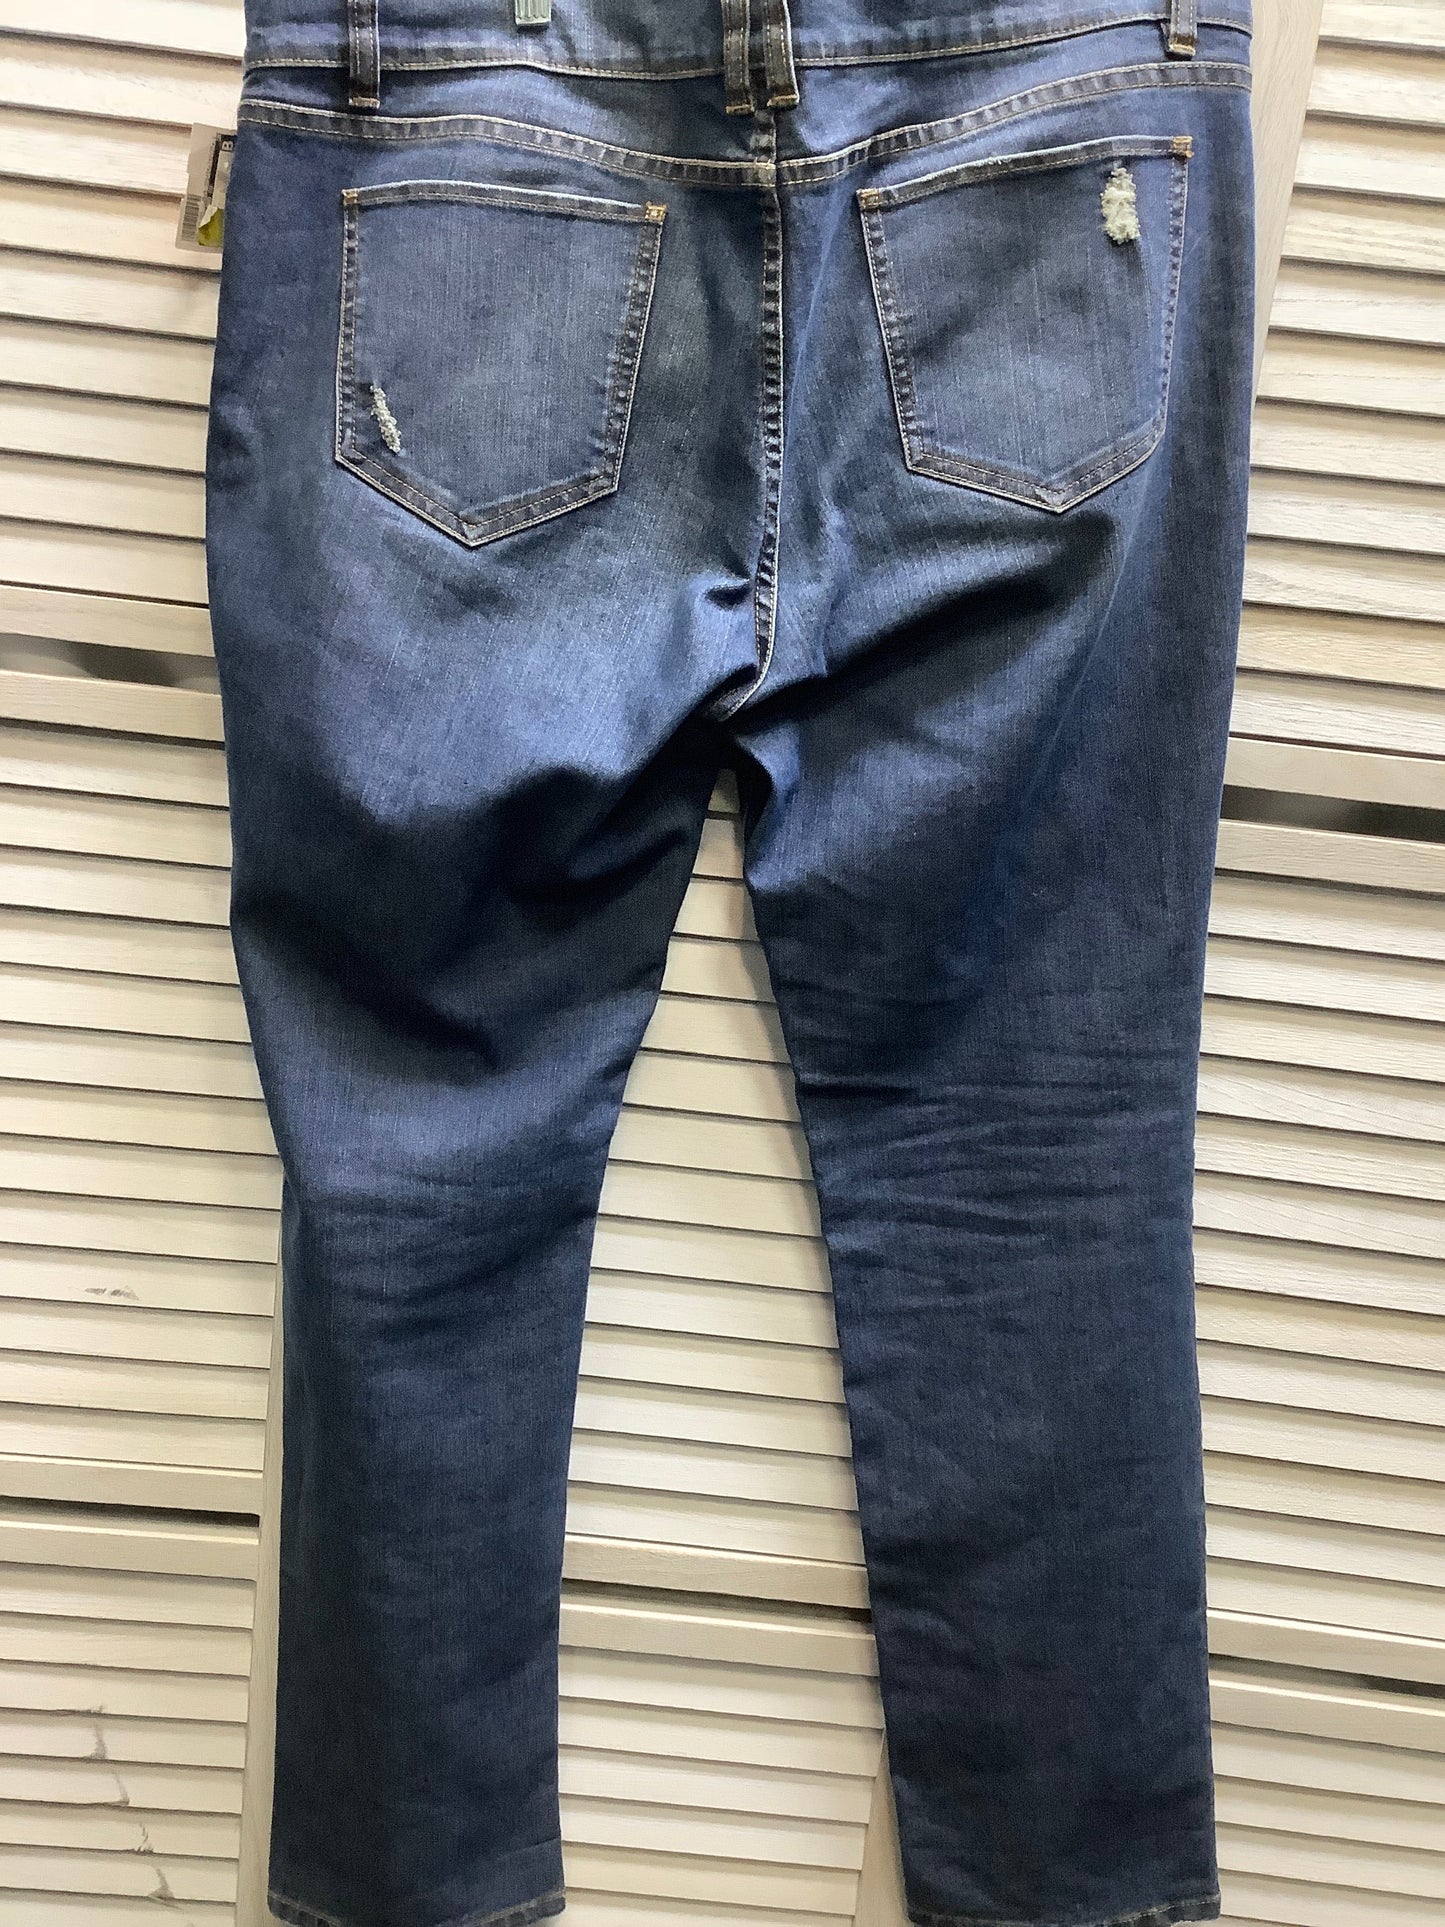 Denim Jeans Skinny New York And Co, Size 16